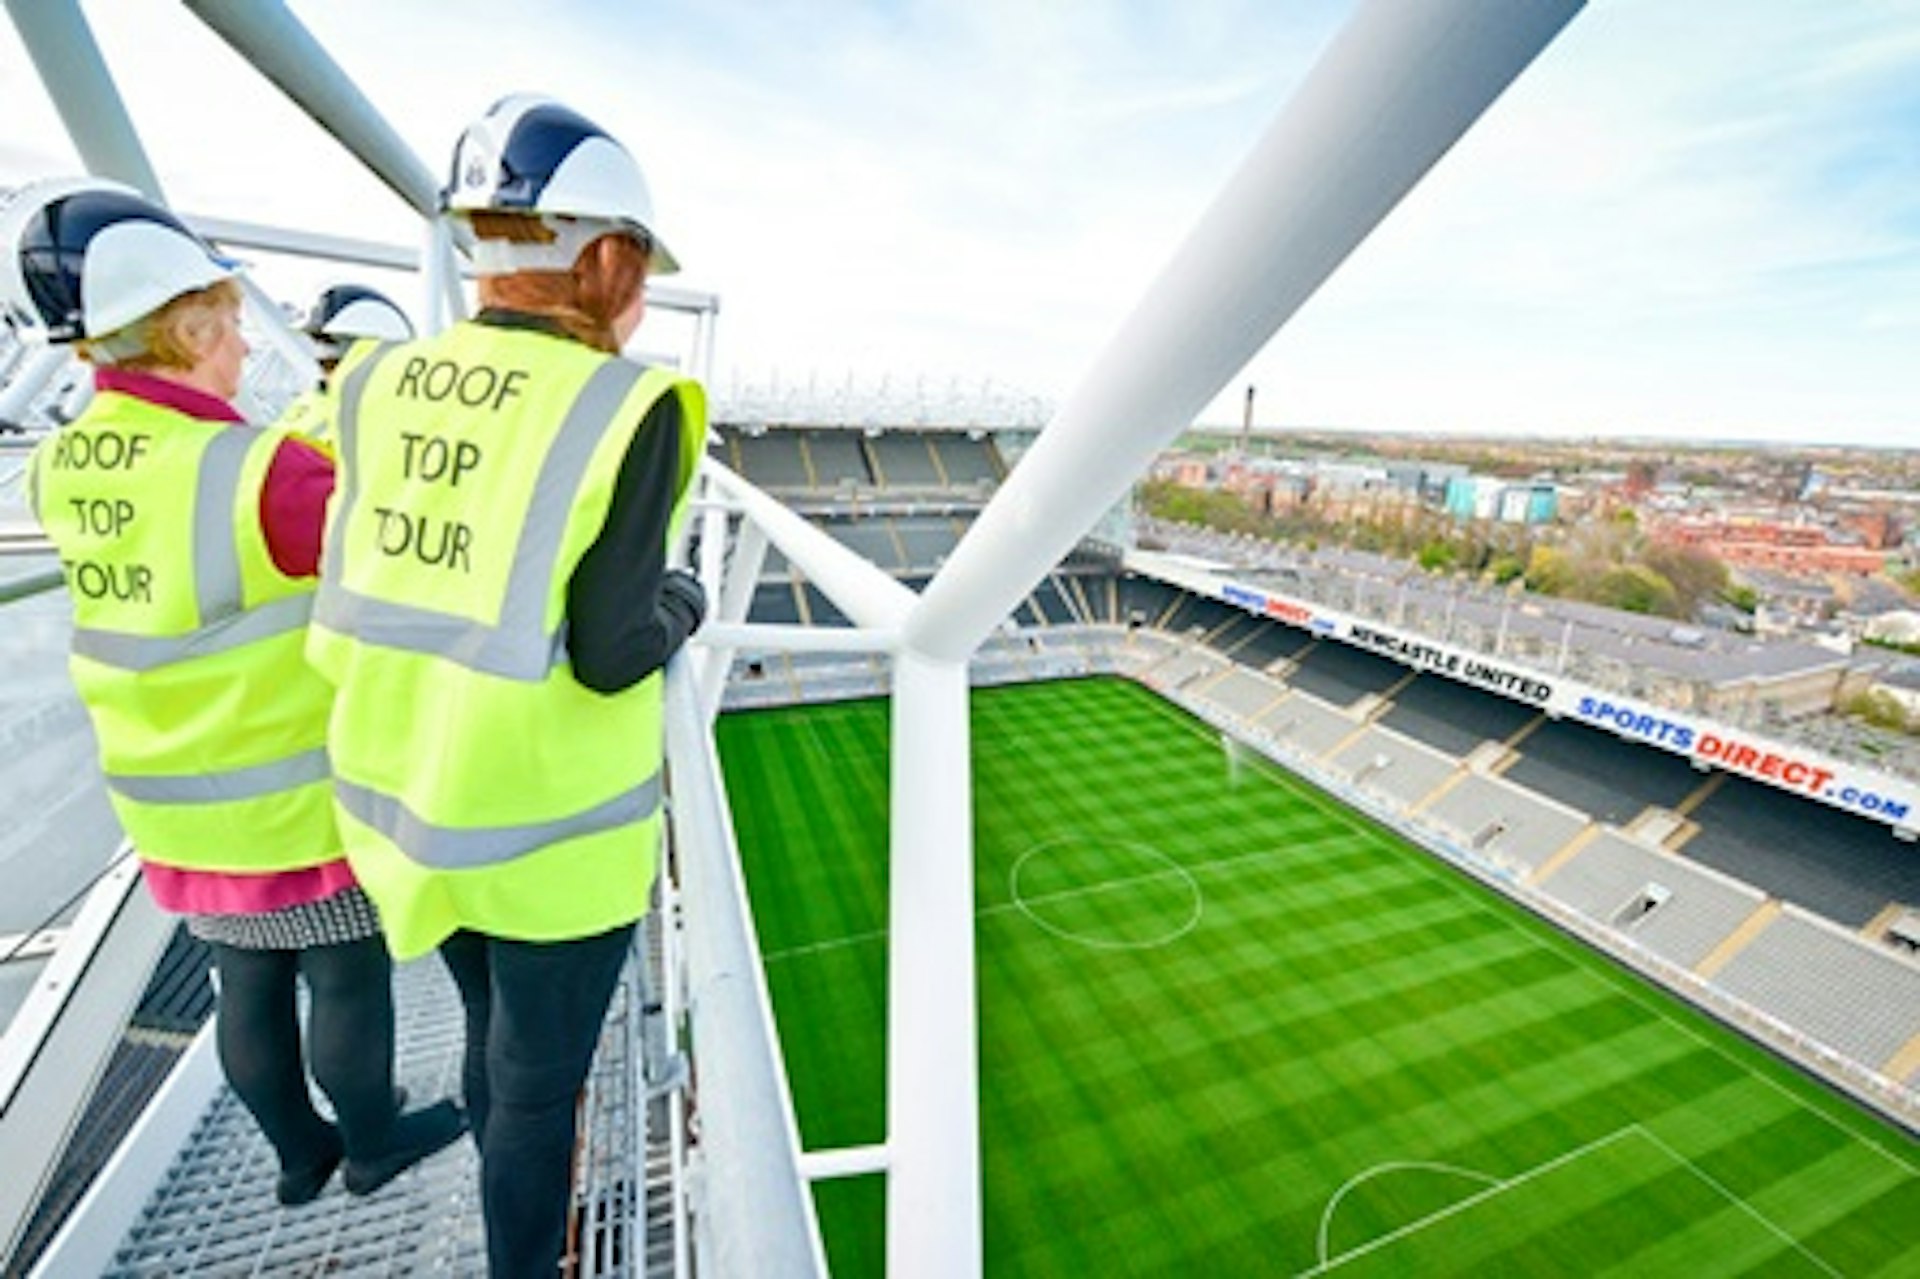 Newcastle United Roof Top Tour for Two 1